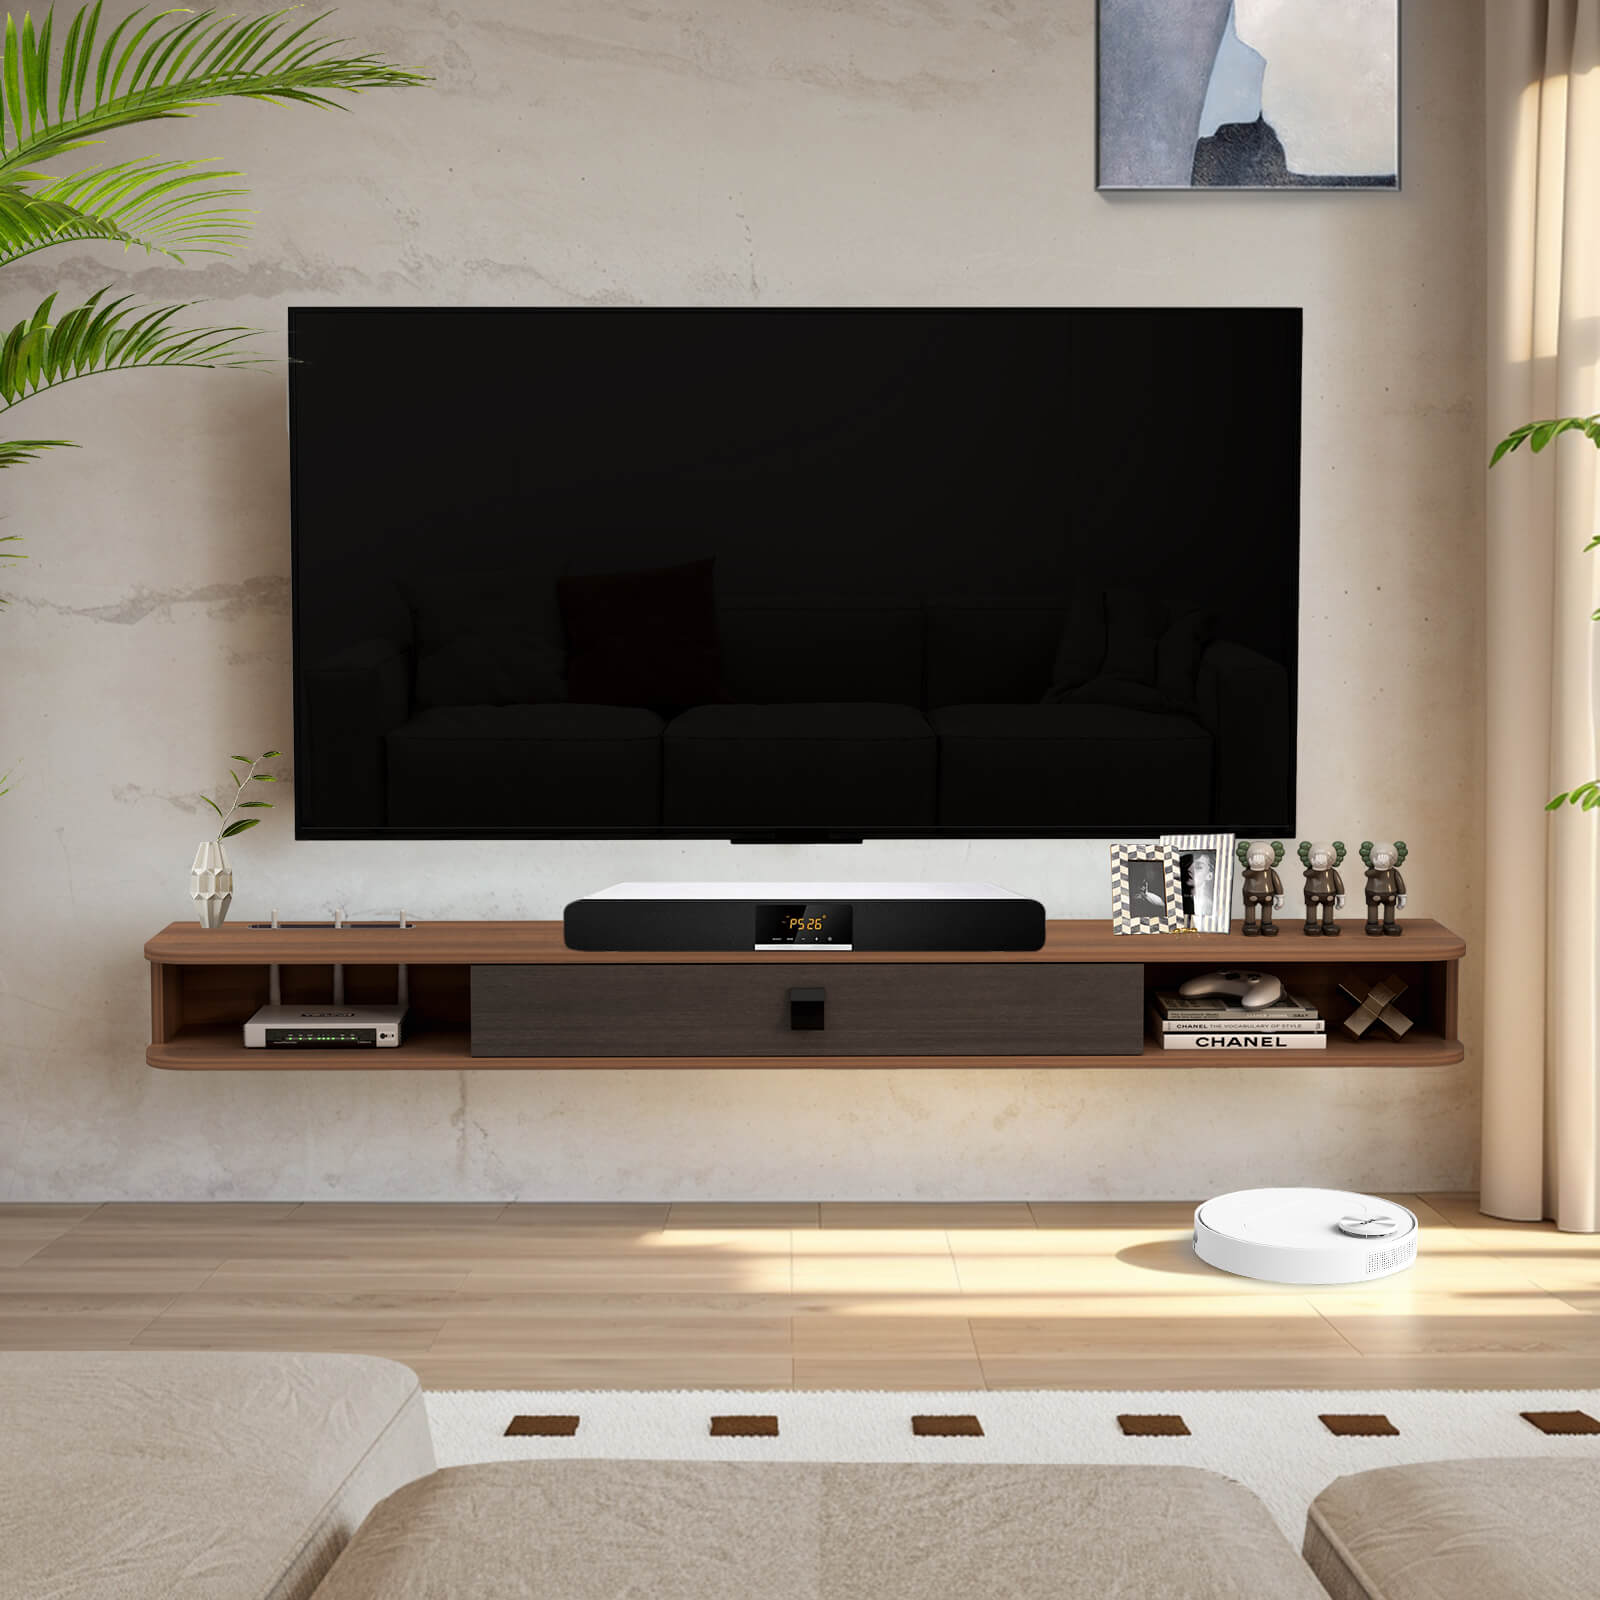 70.86" Walnut Plywood Slim Floating TV Stand for 75" 80" TV